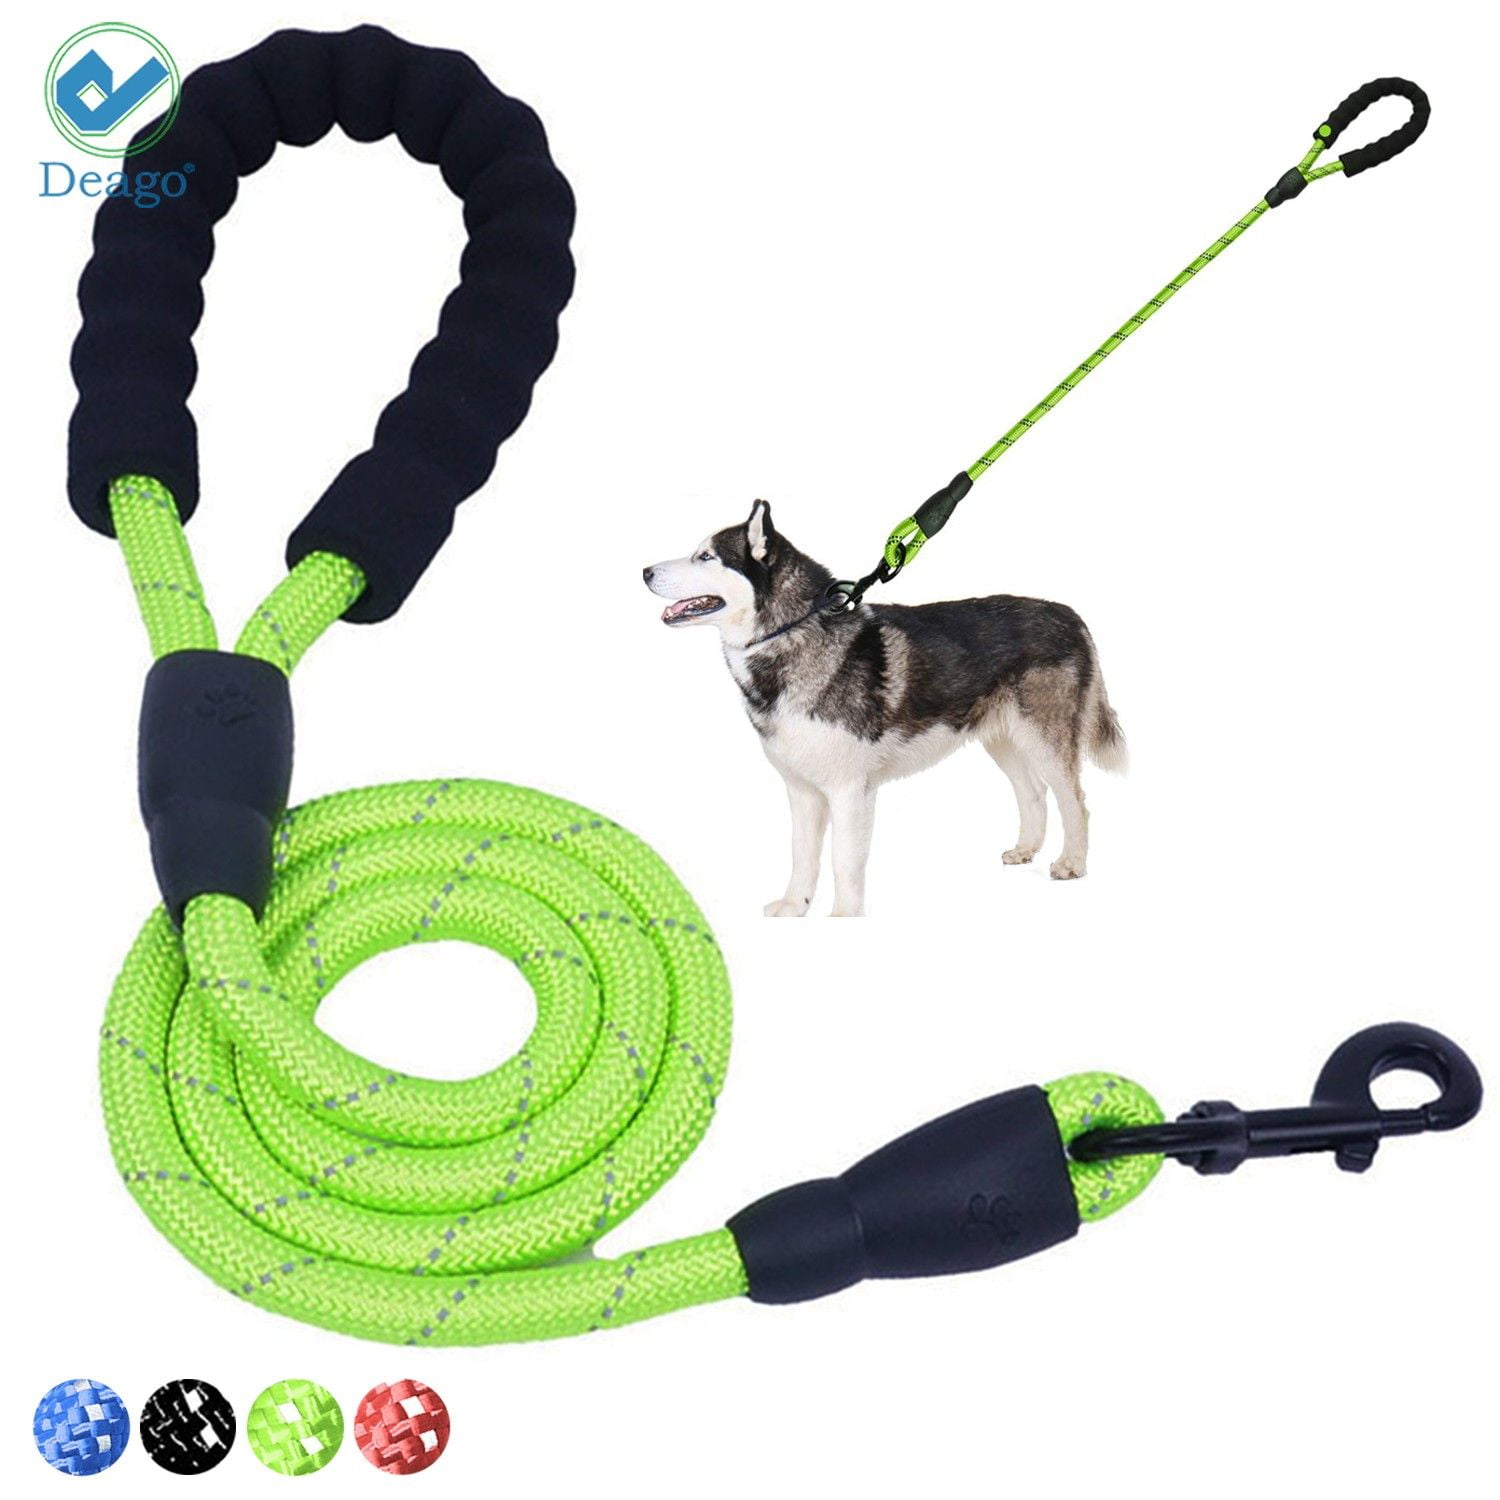 HIKISS 5 FT Strong Dog Leash Rope Leash with Comfortable Padded Handle and Highly Reflective Threads Durable Dog Leashes for Medium and Large Dogs-Black Green 18-120 lbs